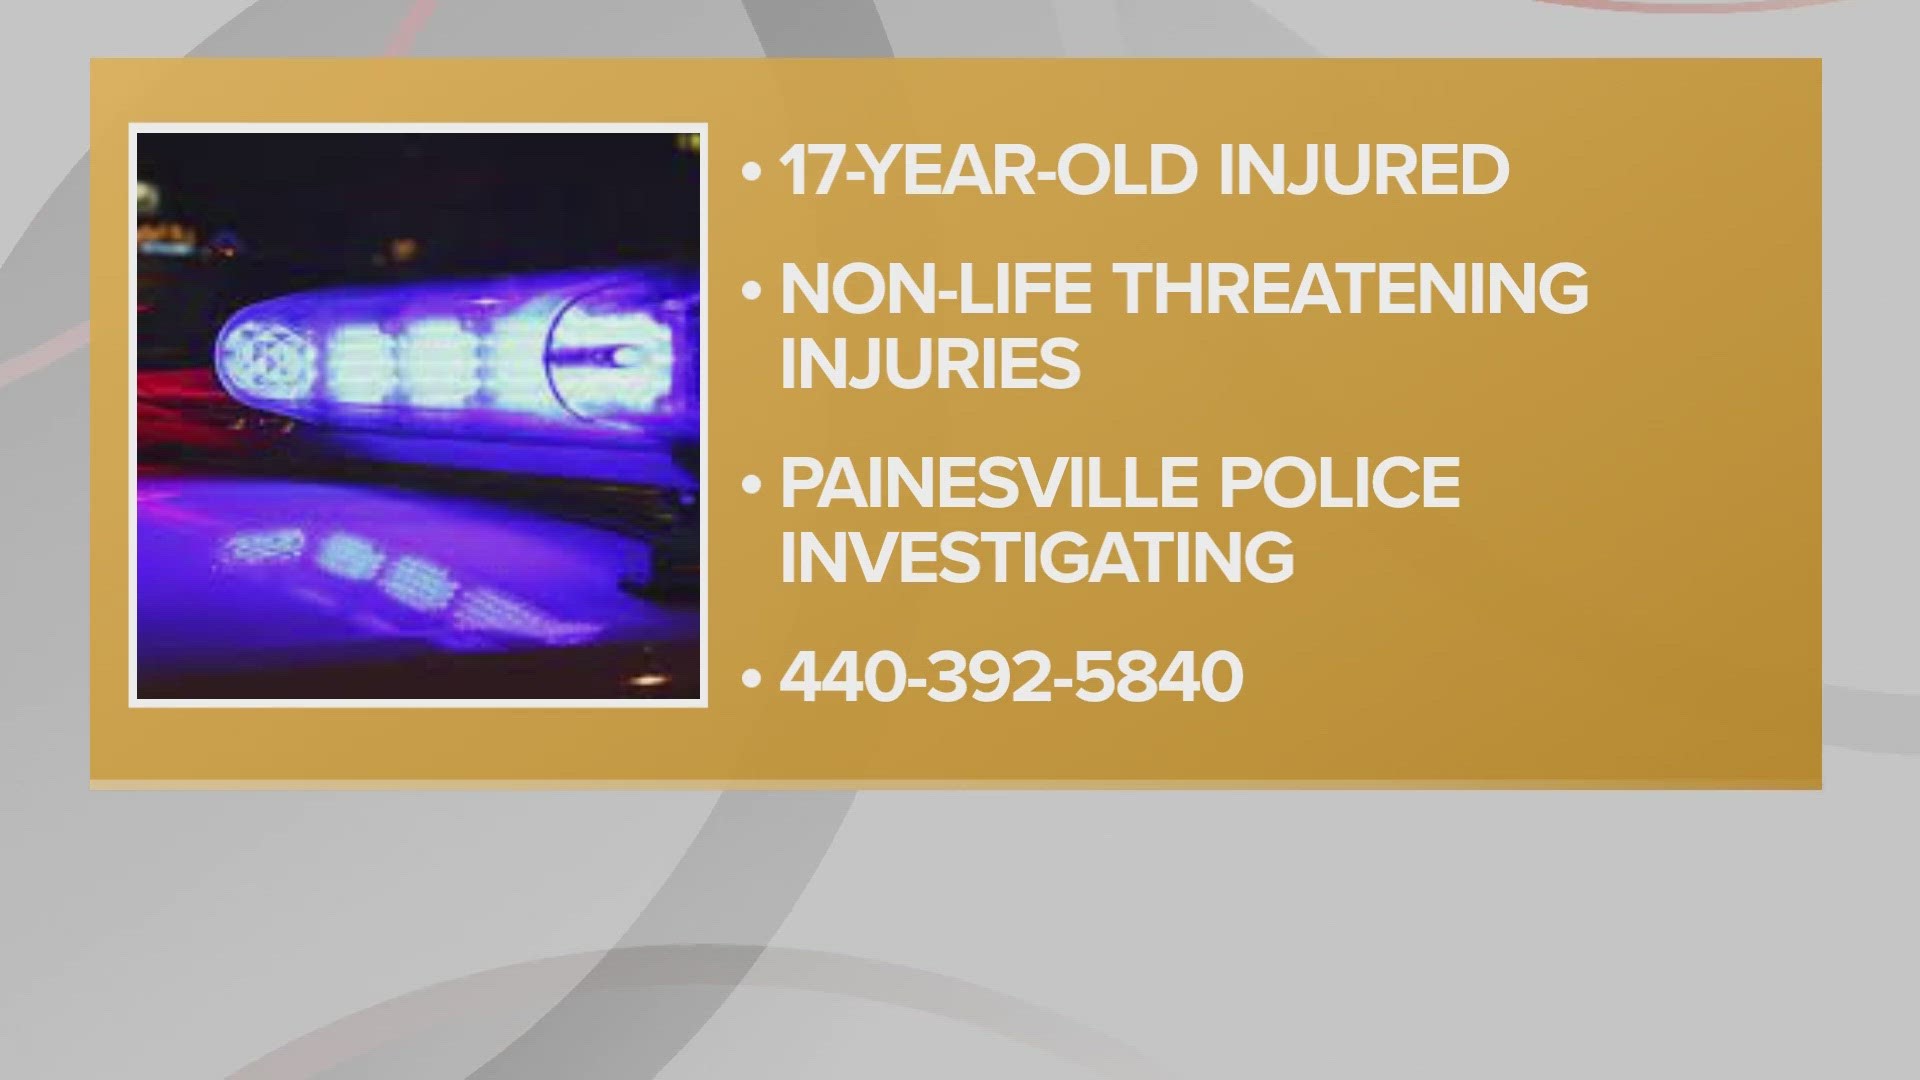 The 17-year-old Painesville boy suffered non-life-threatening injuries.